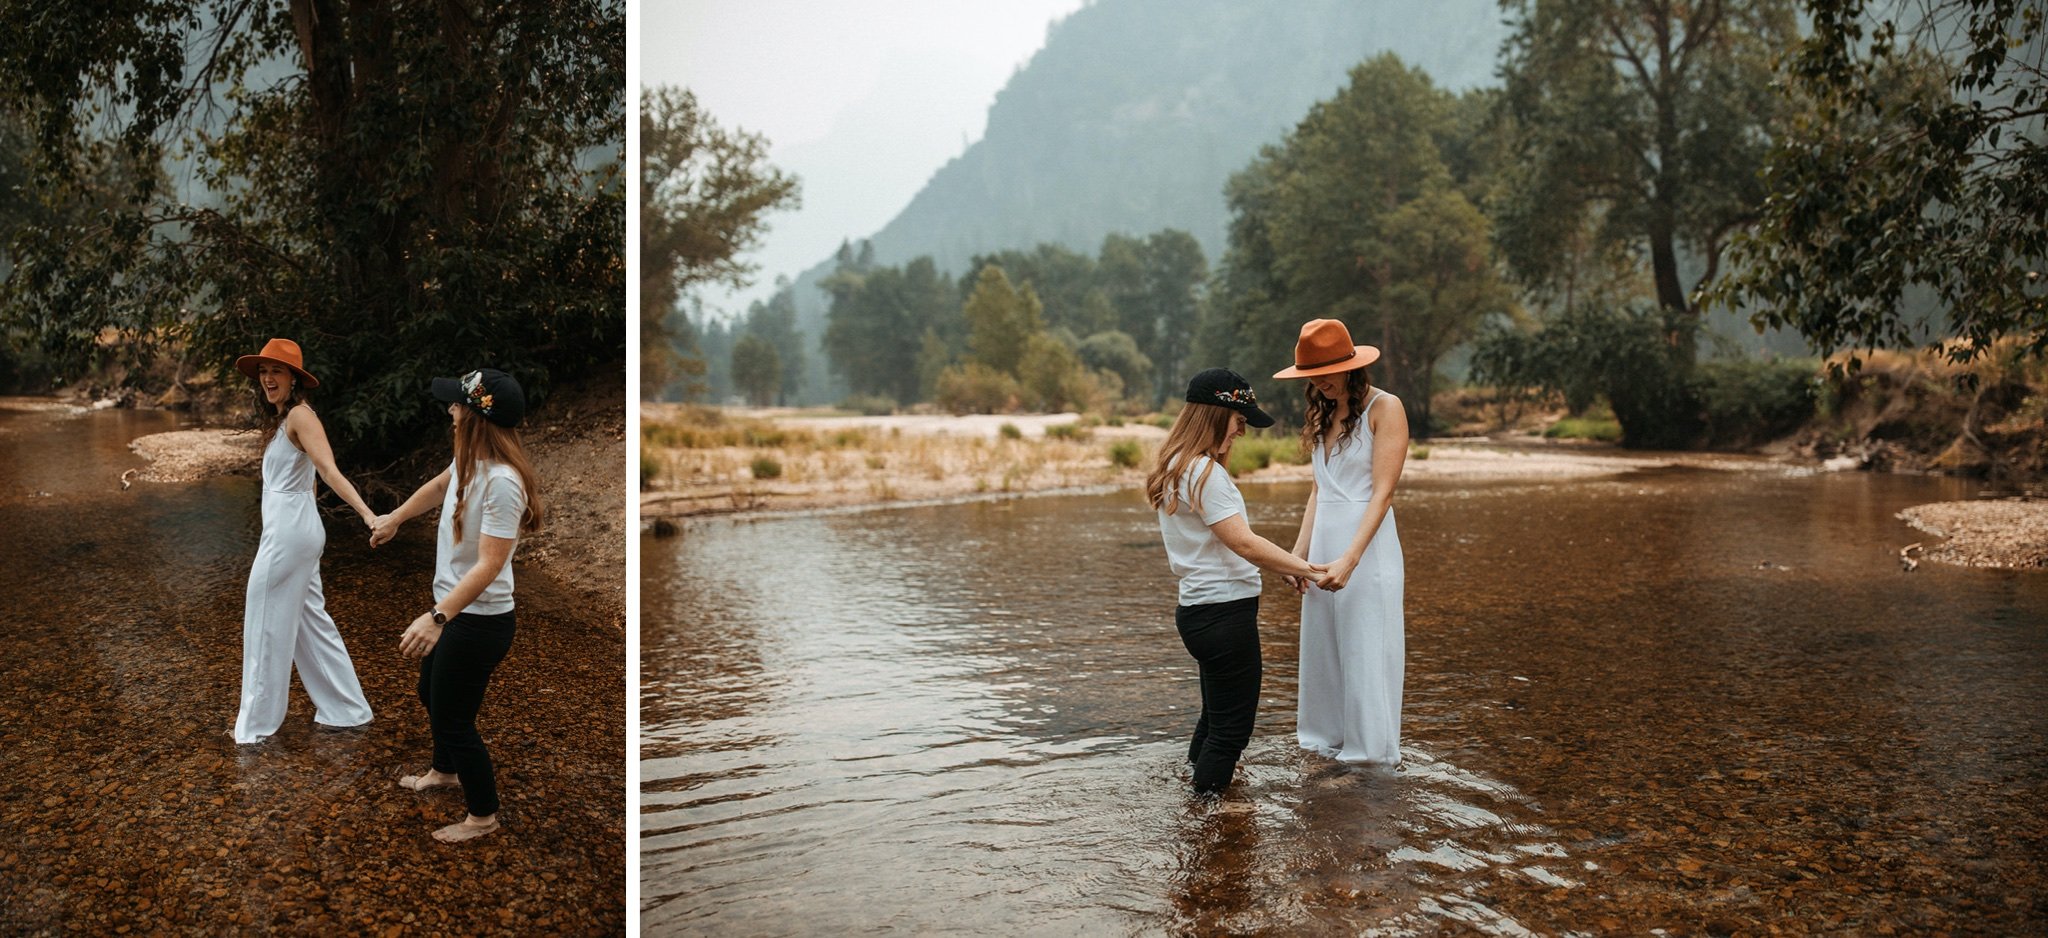 Yosemite National Park Elopement with Two Brides-Will Khoury102.jpg